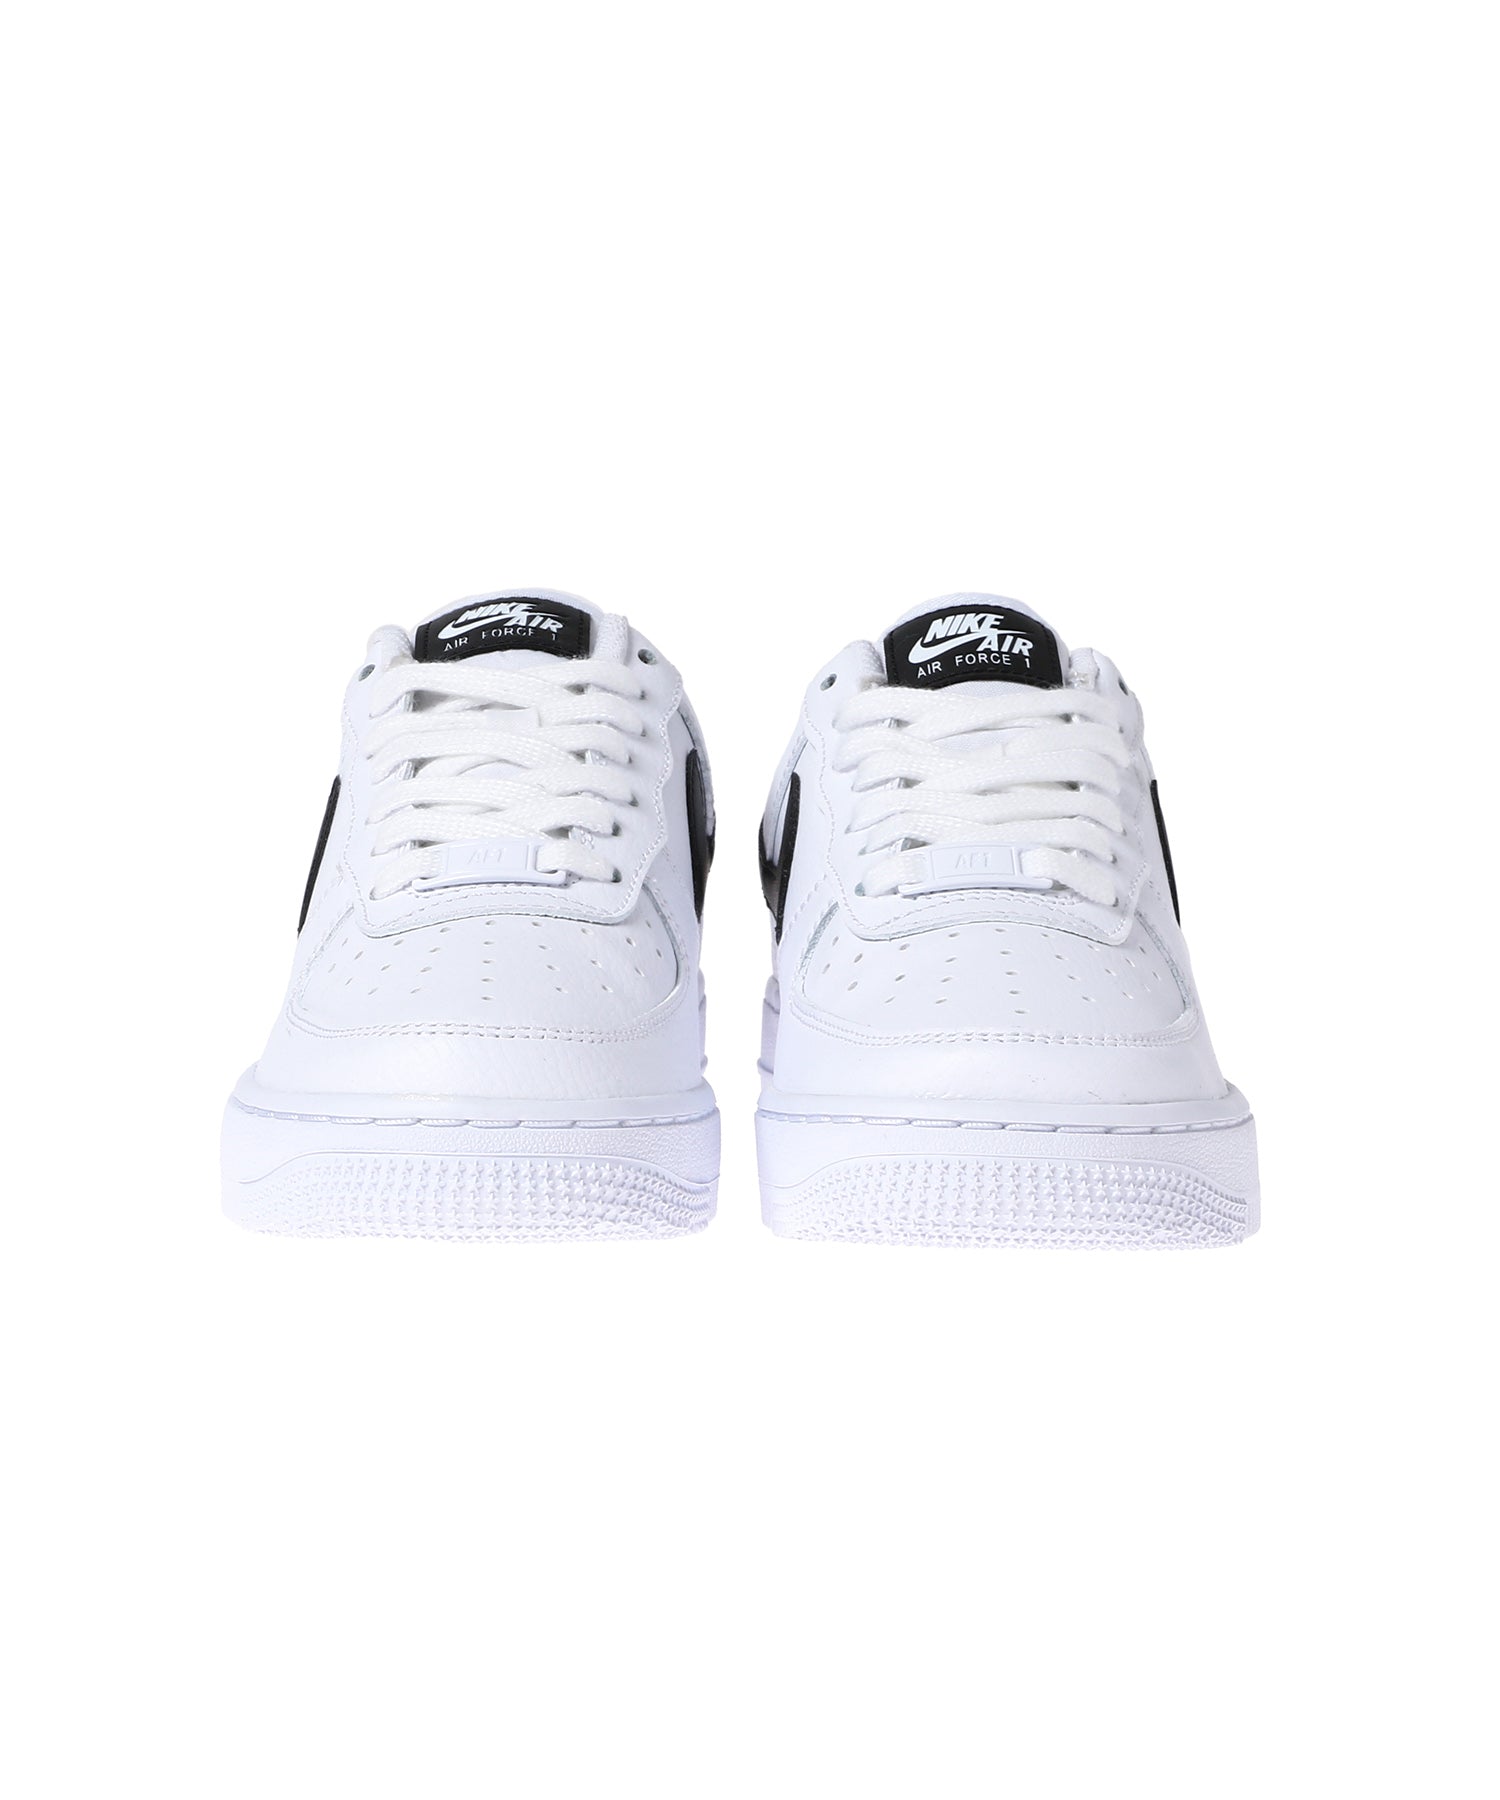 Nike Wmns Air Force 1 07